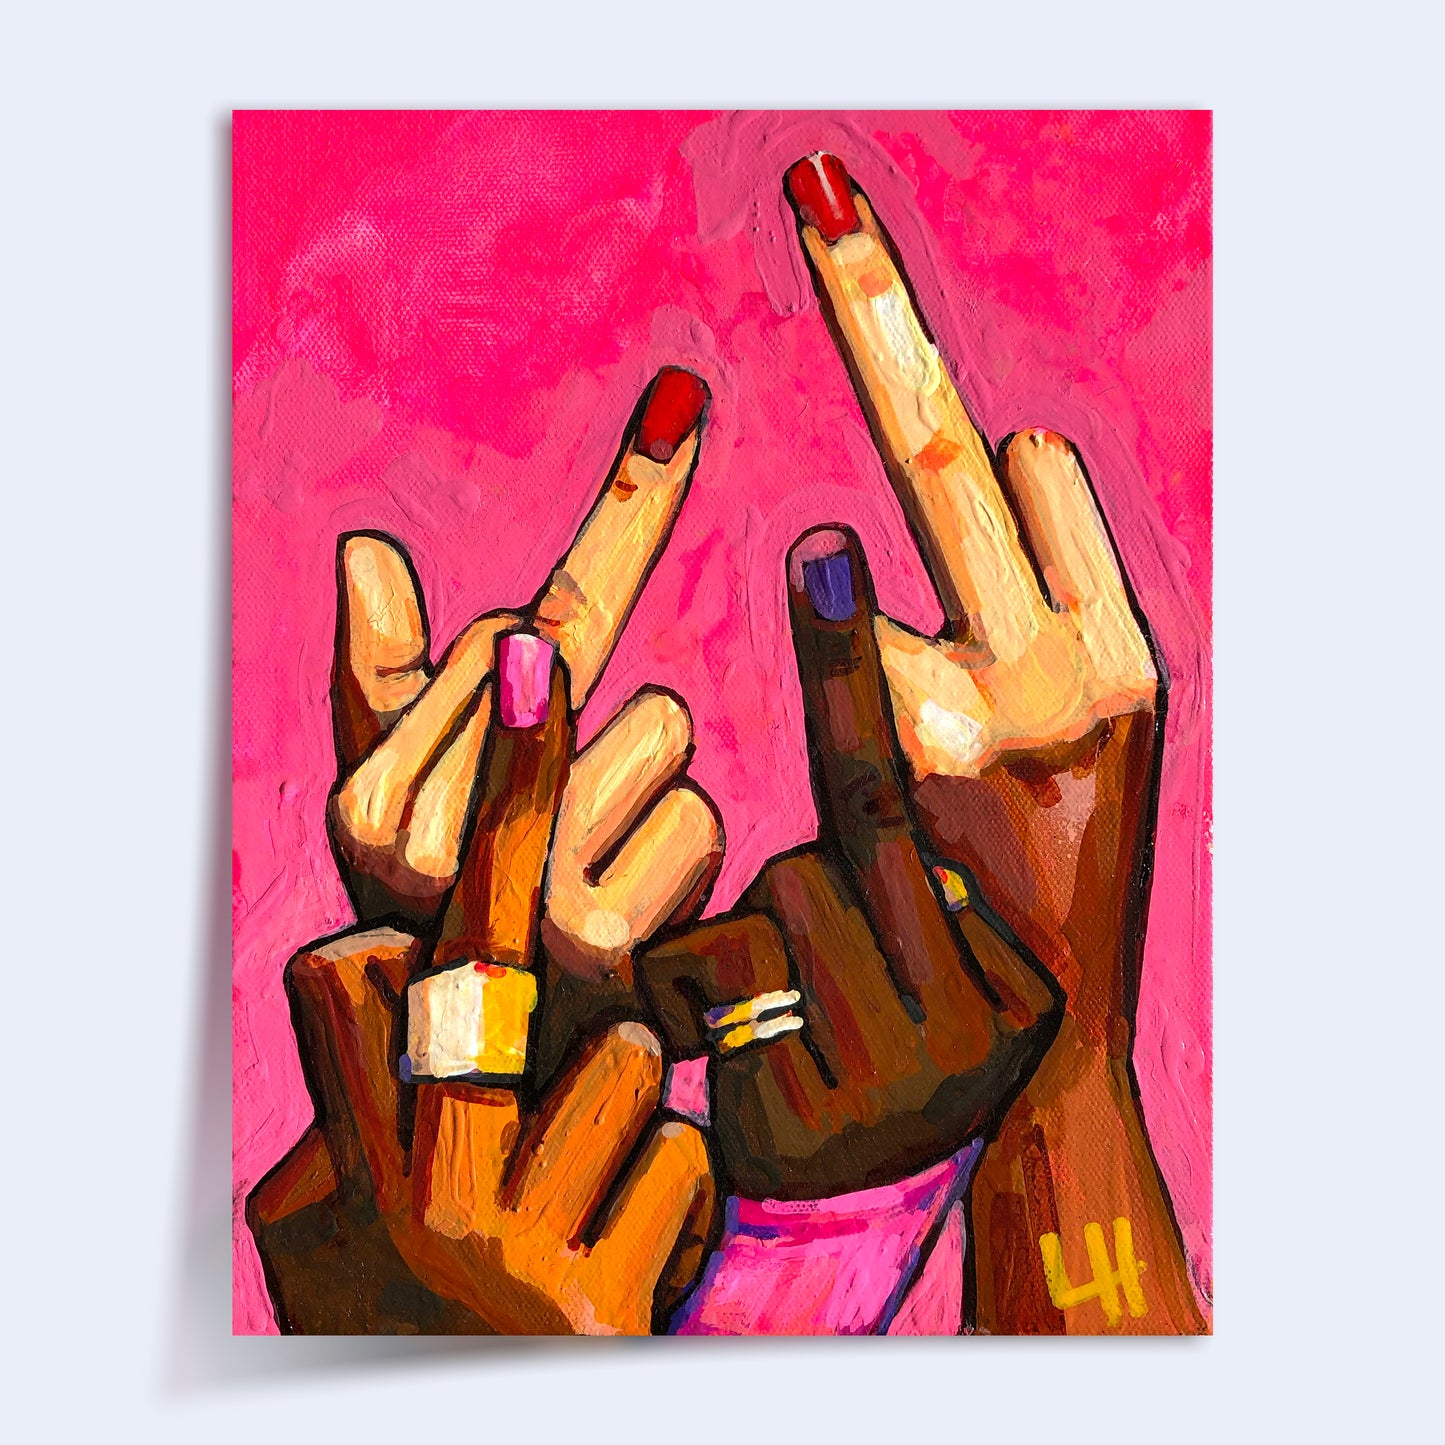 8 x 10 'Middle Fingers Up' Print